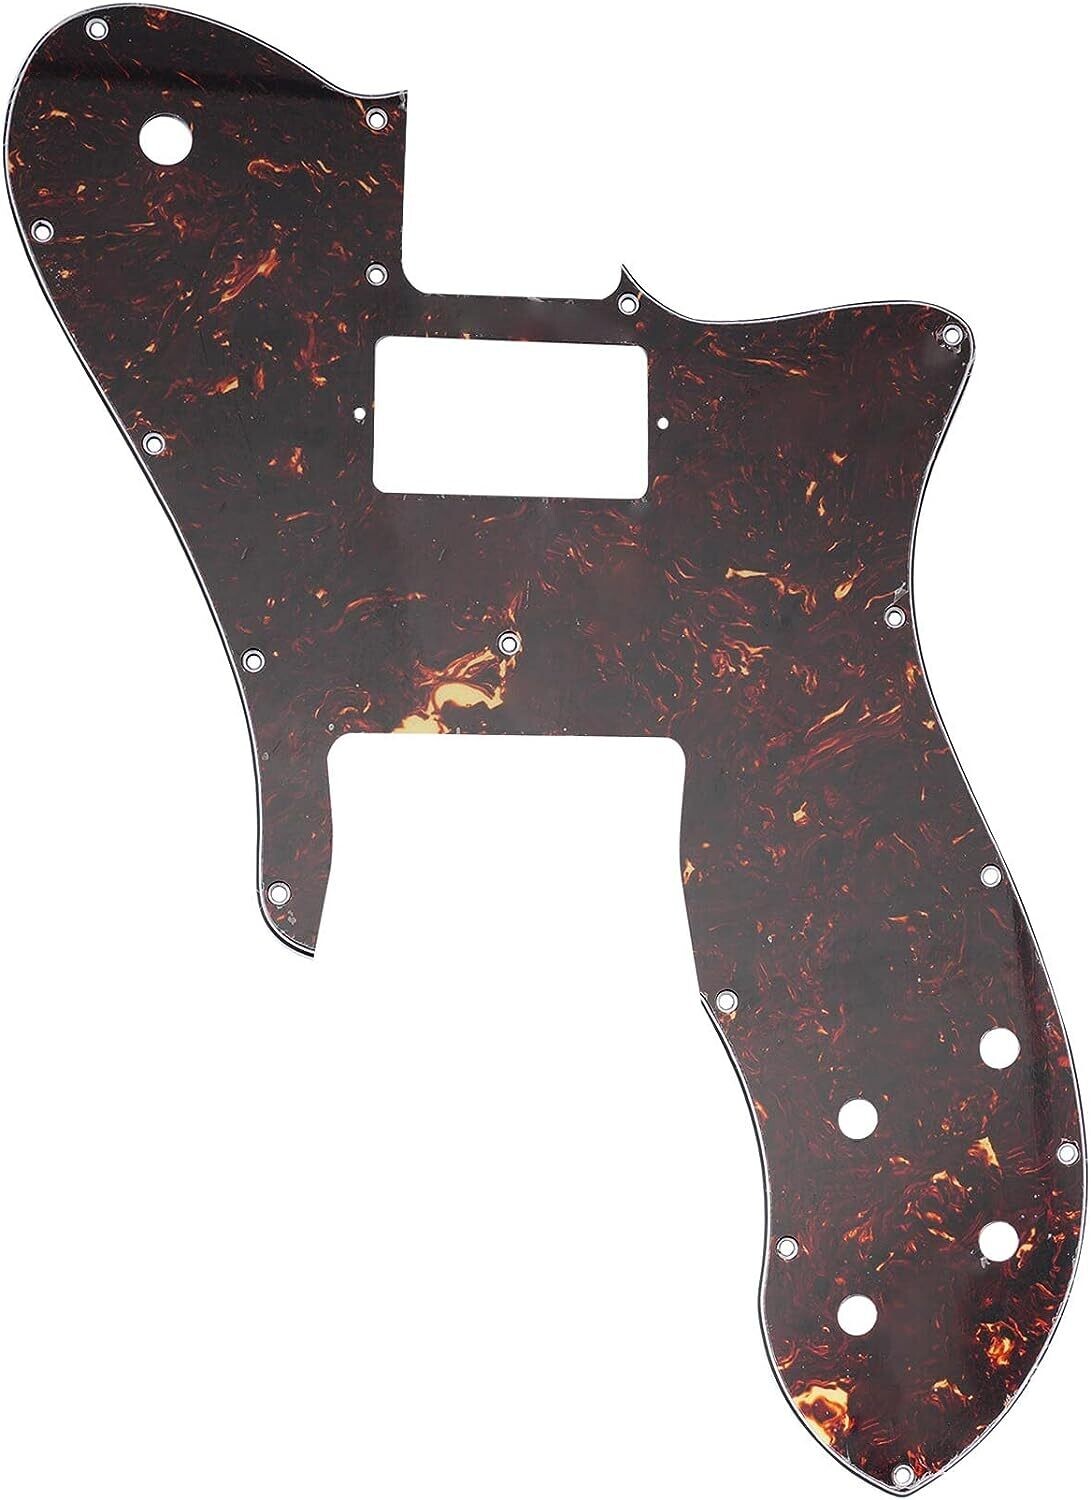 16 Holes Single H Guitar Pickguard For USA/Mexico Fender 72 Tele Custom Style Electric Guitar 4ply Brown Tort